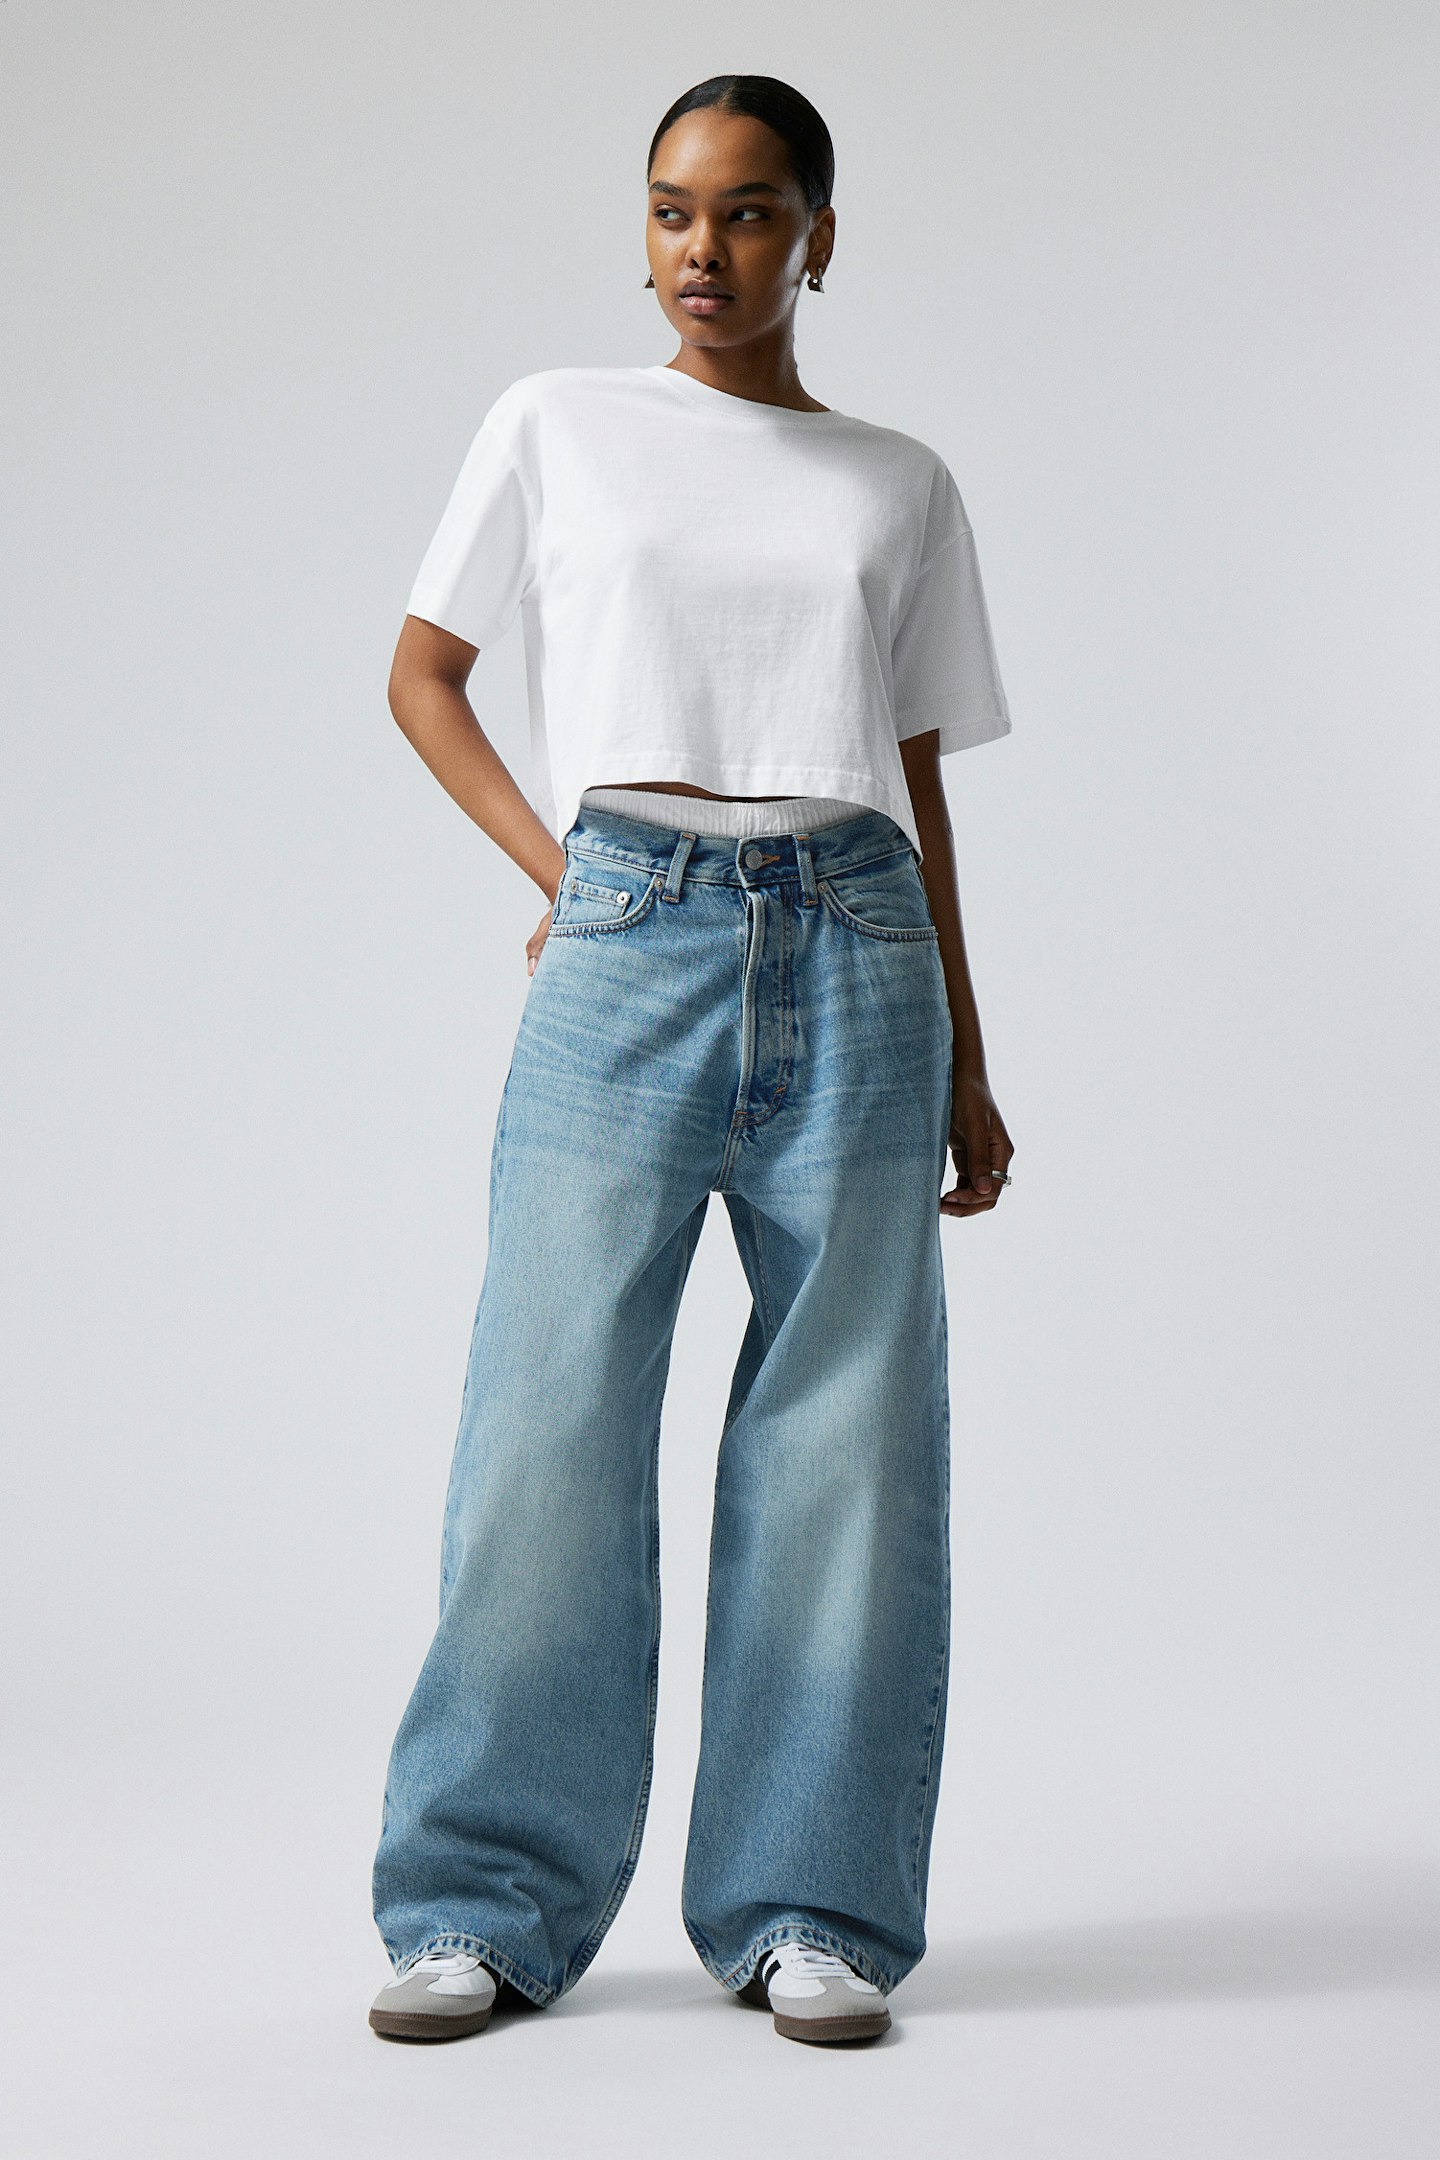 Weekday's Jeans Are The Most Popular Pair In The World Right Now